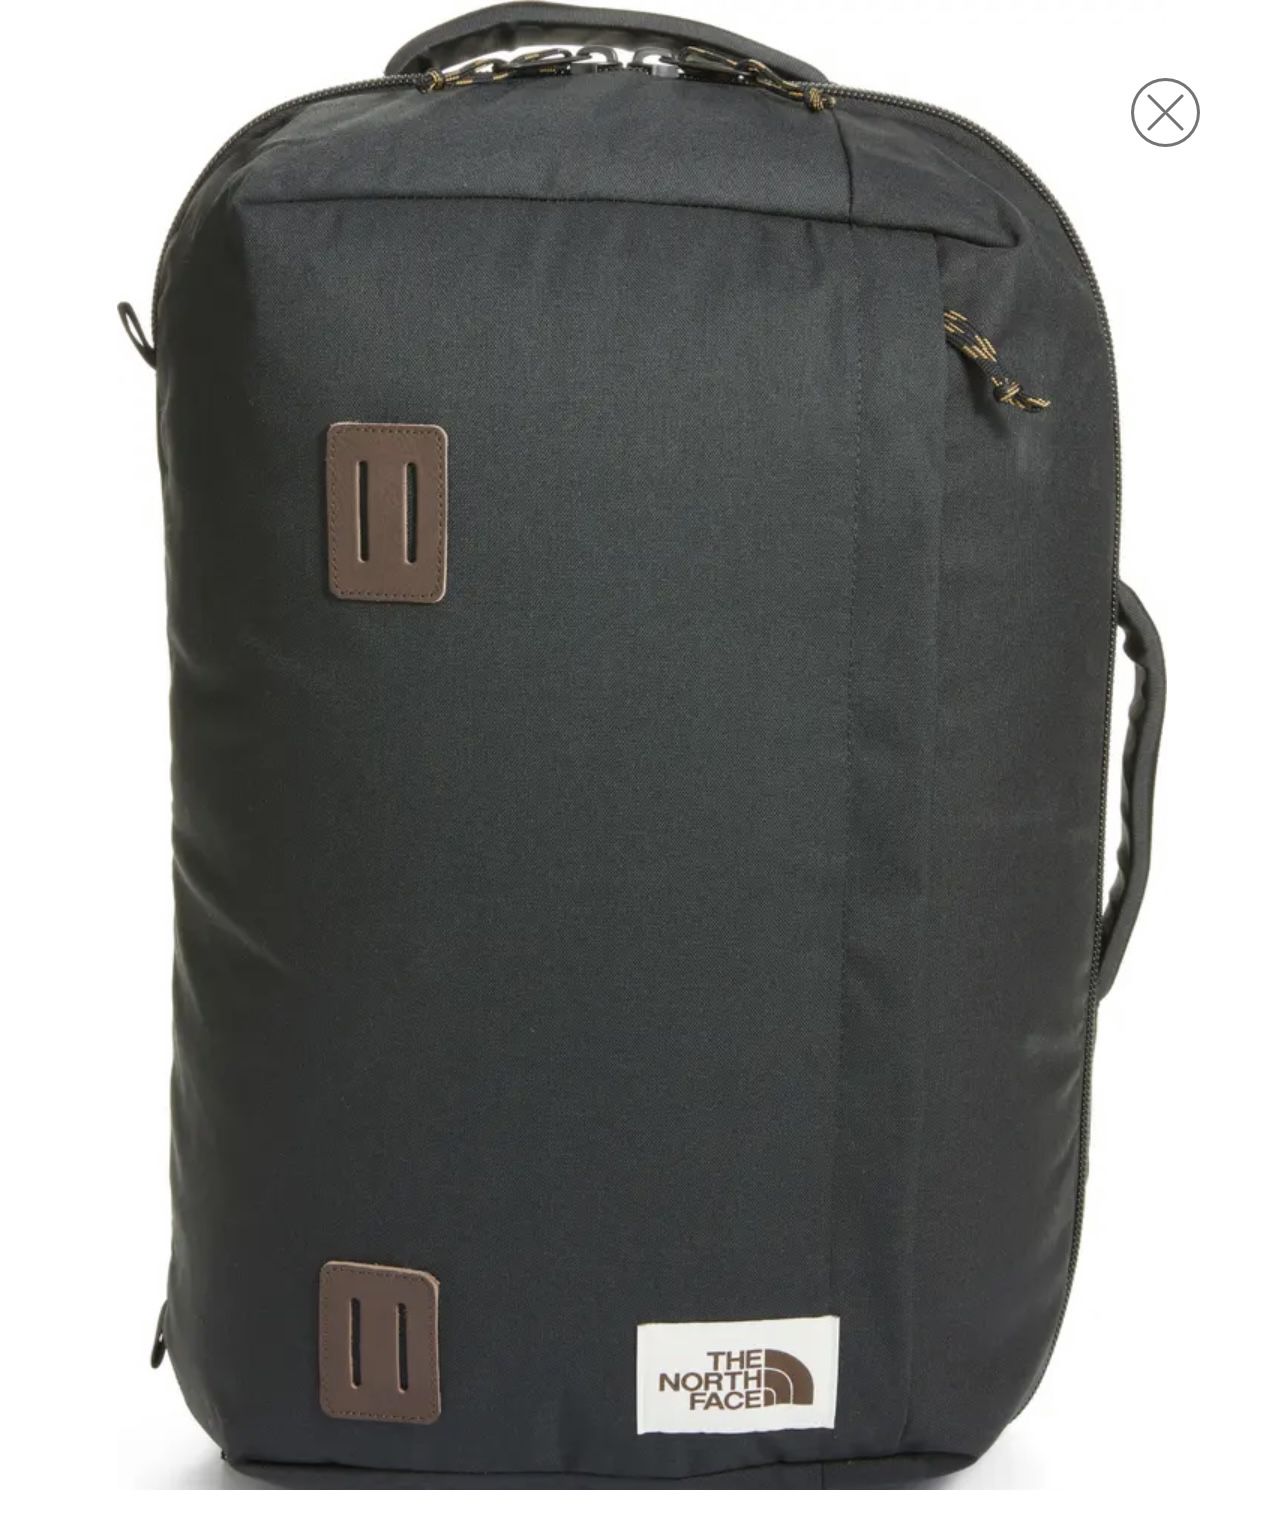 NORTH FACE Travel Duffle Bag